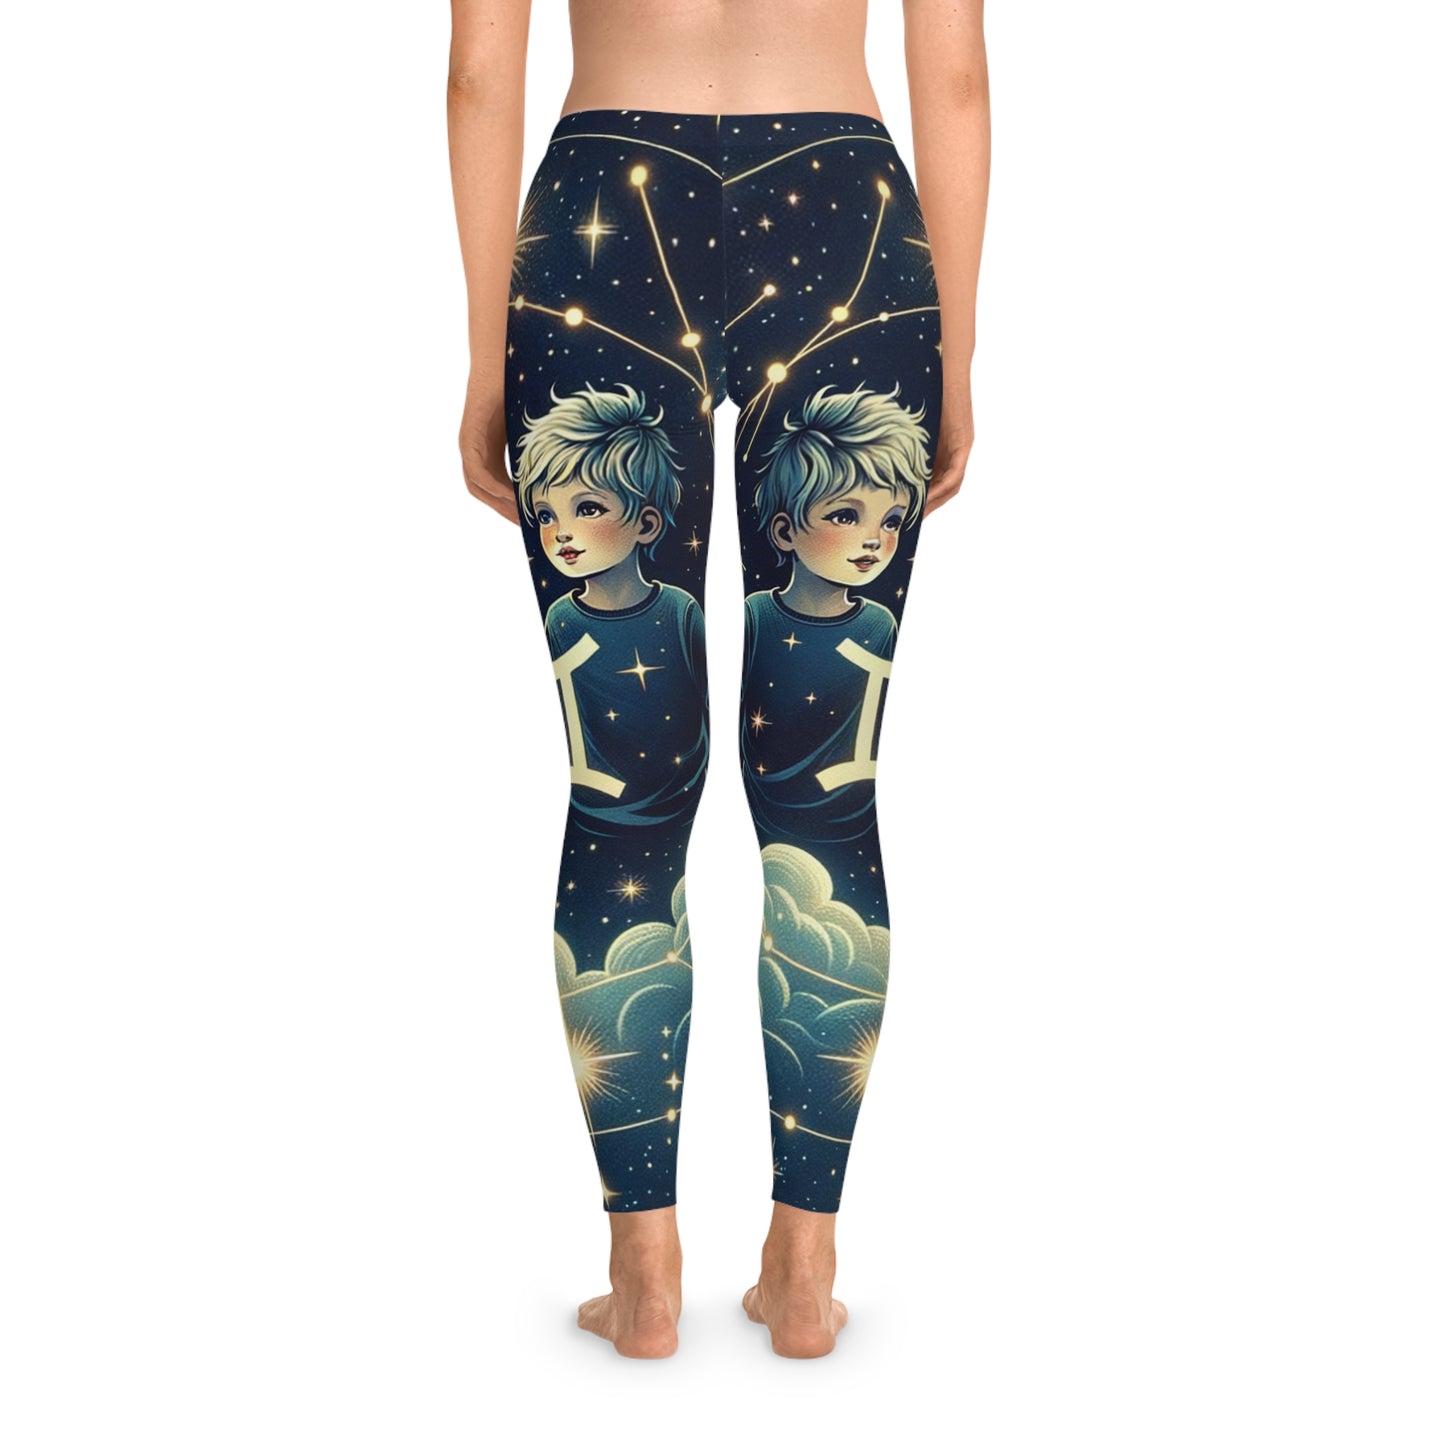 "Celestial Twinfinity" - Unisex Tights